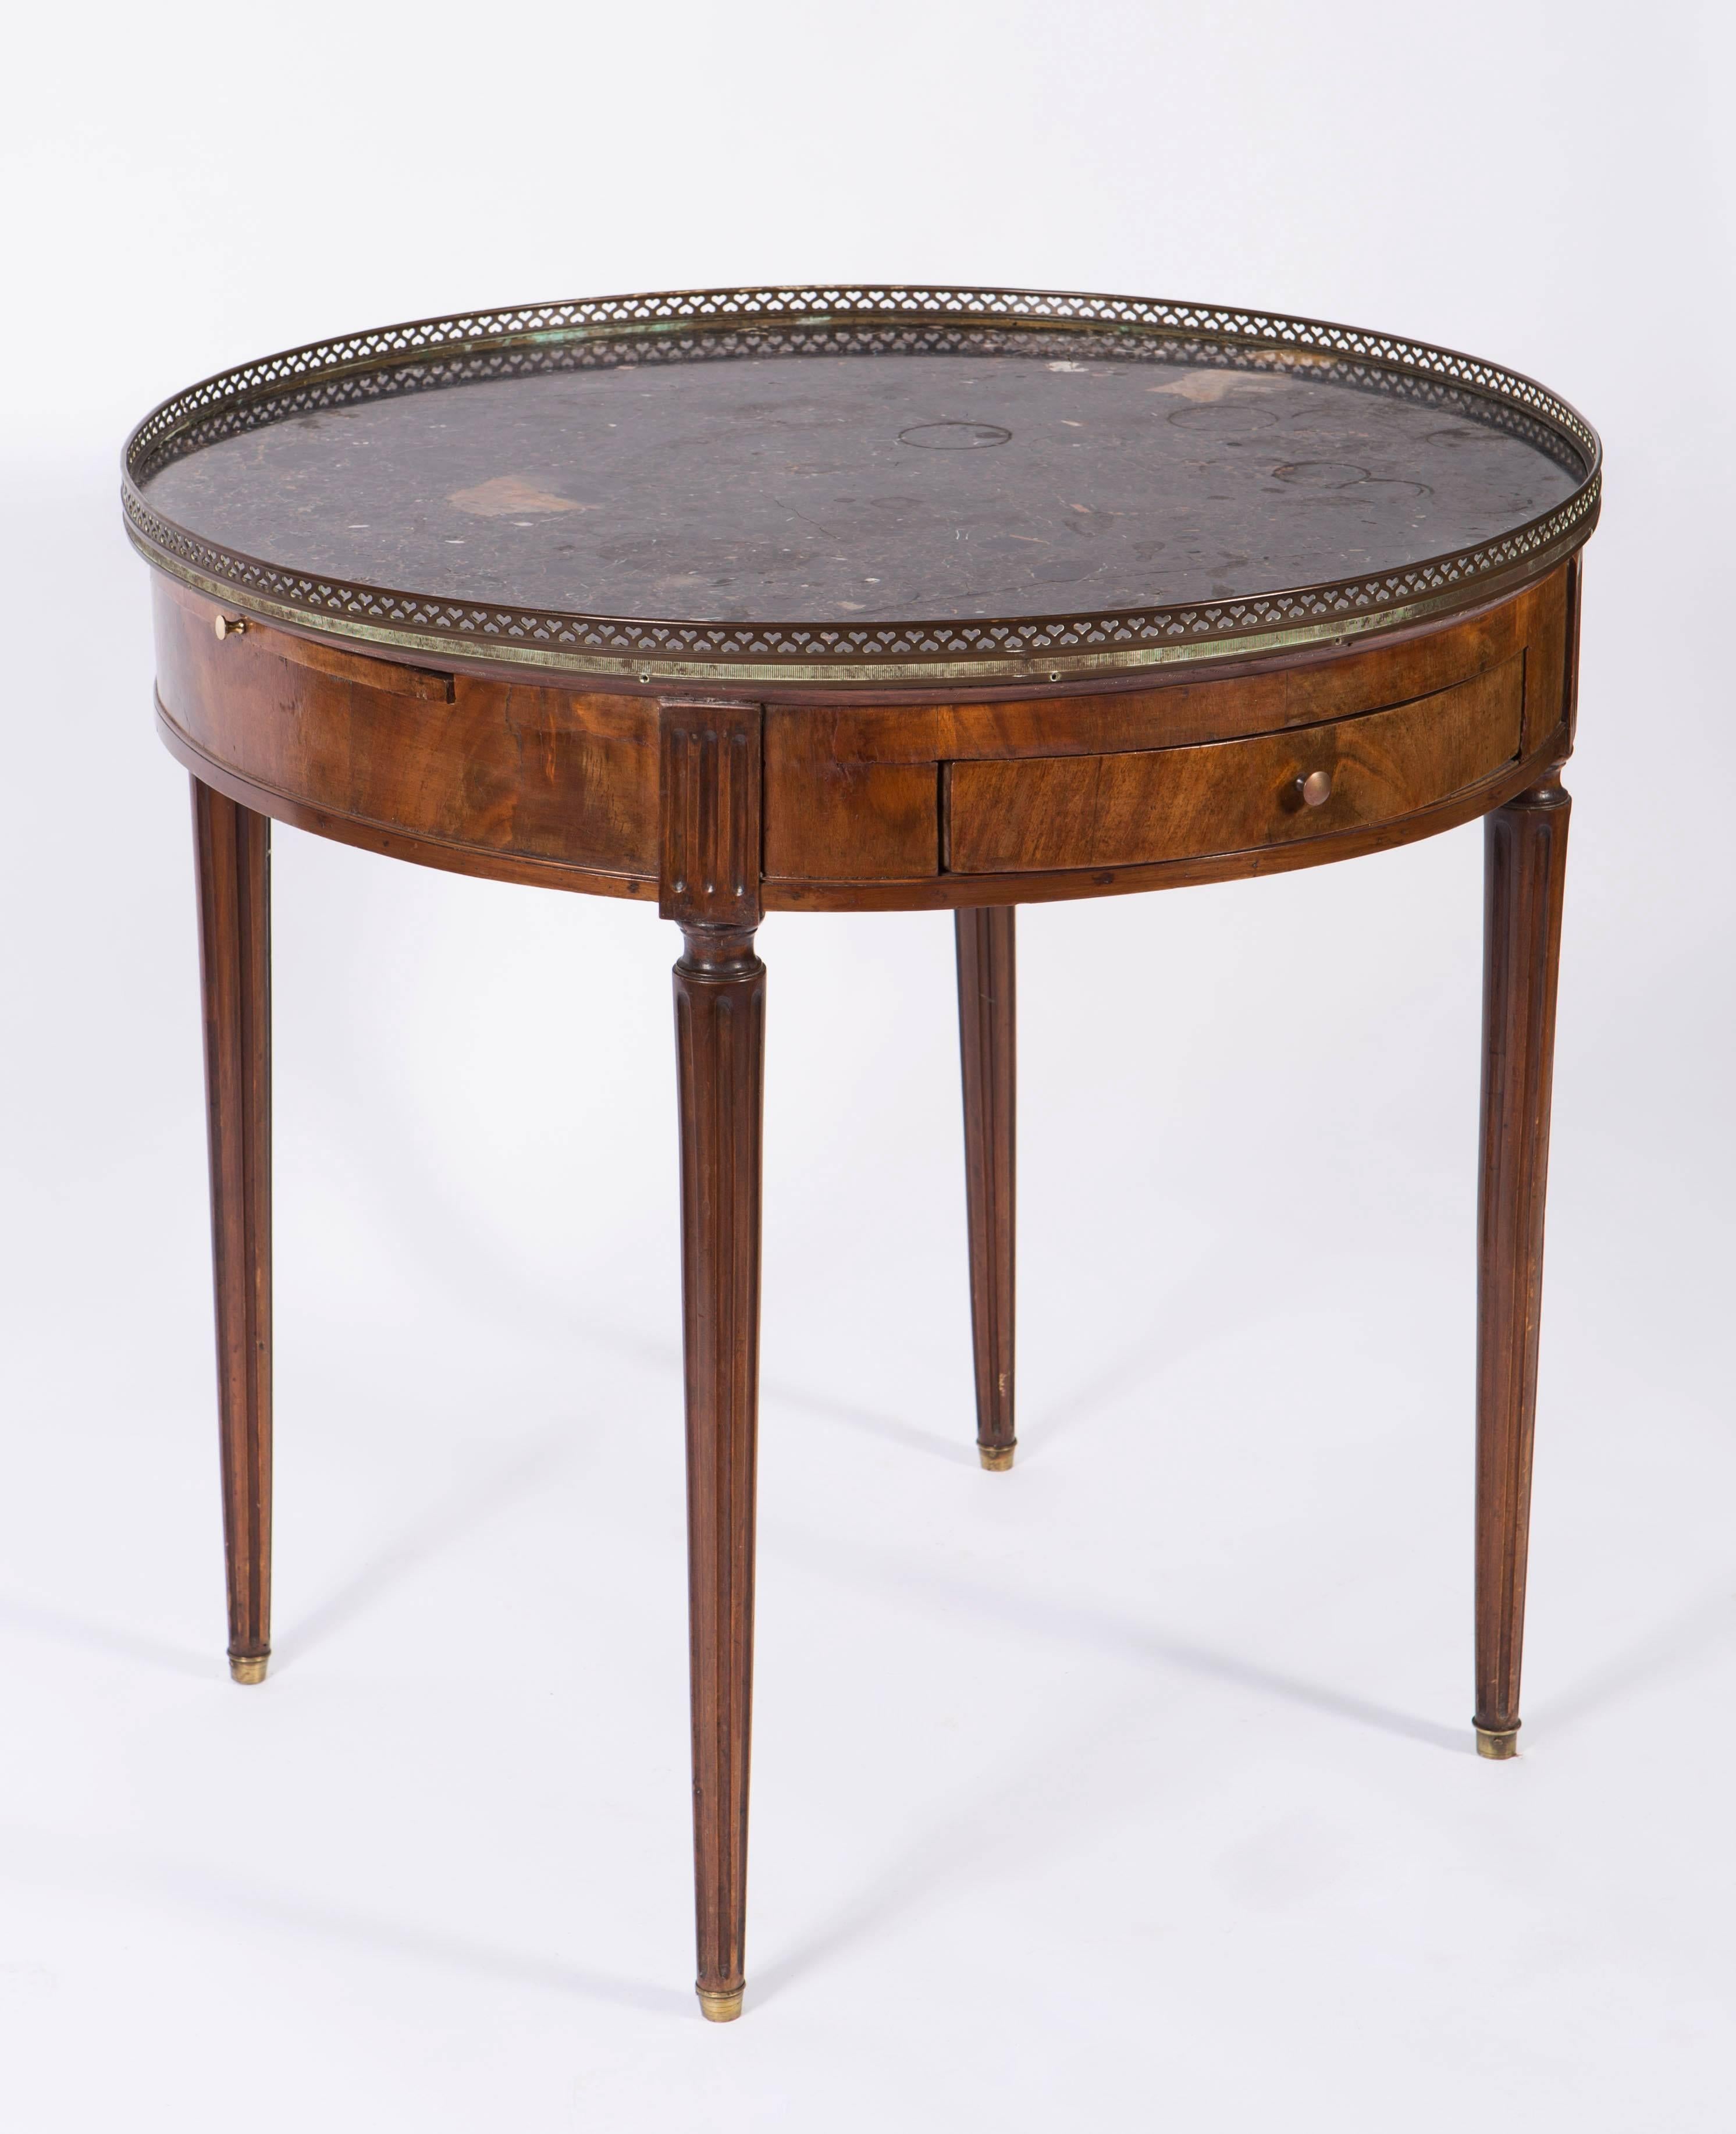 19th century French round mahogany side table with marble top with brass gallery. The round table has two drawers, one on each side and two candle slides, one on each side as well. The marble has a crack that does not distract from the piece.  